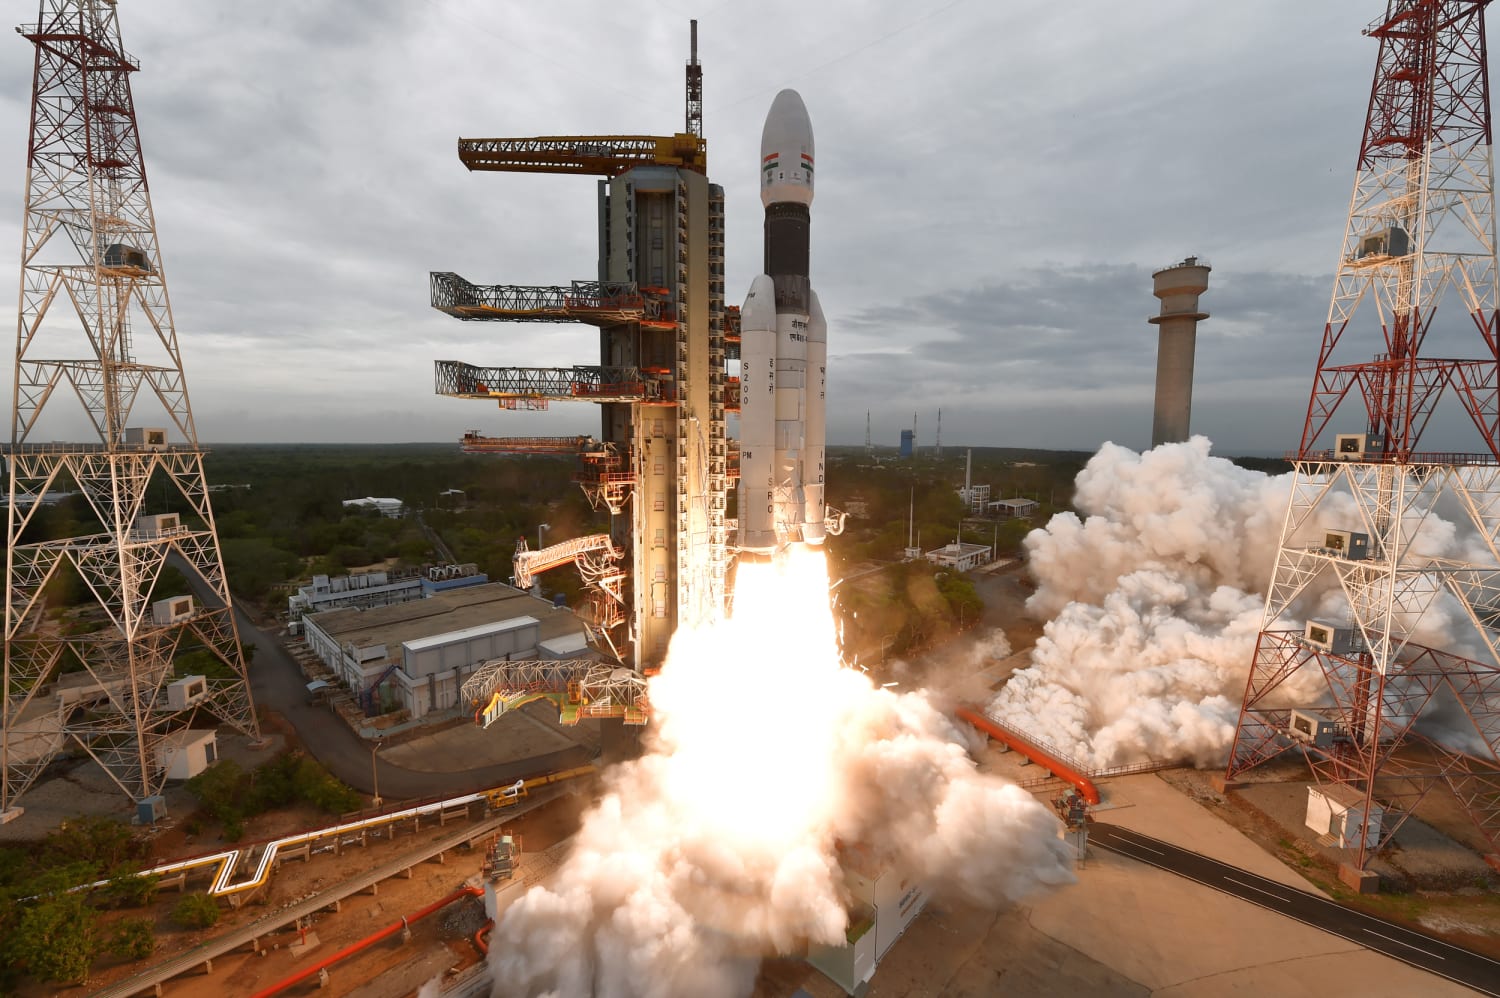 Watch India's Chandrayaan-2 moon mission attempt historic lunar landing